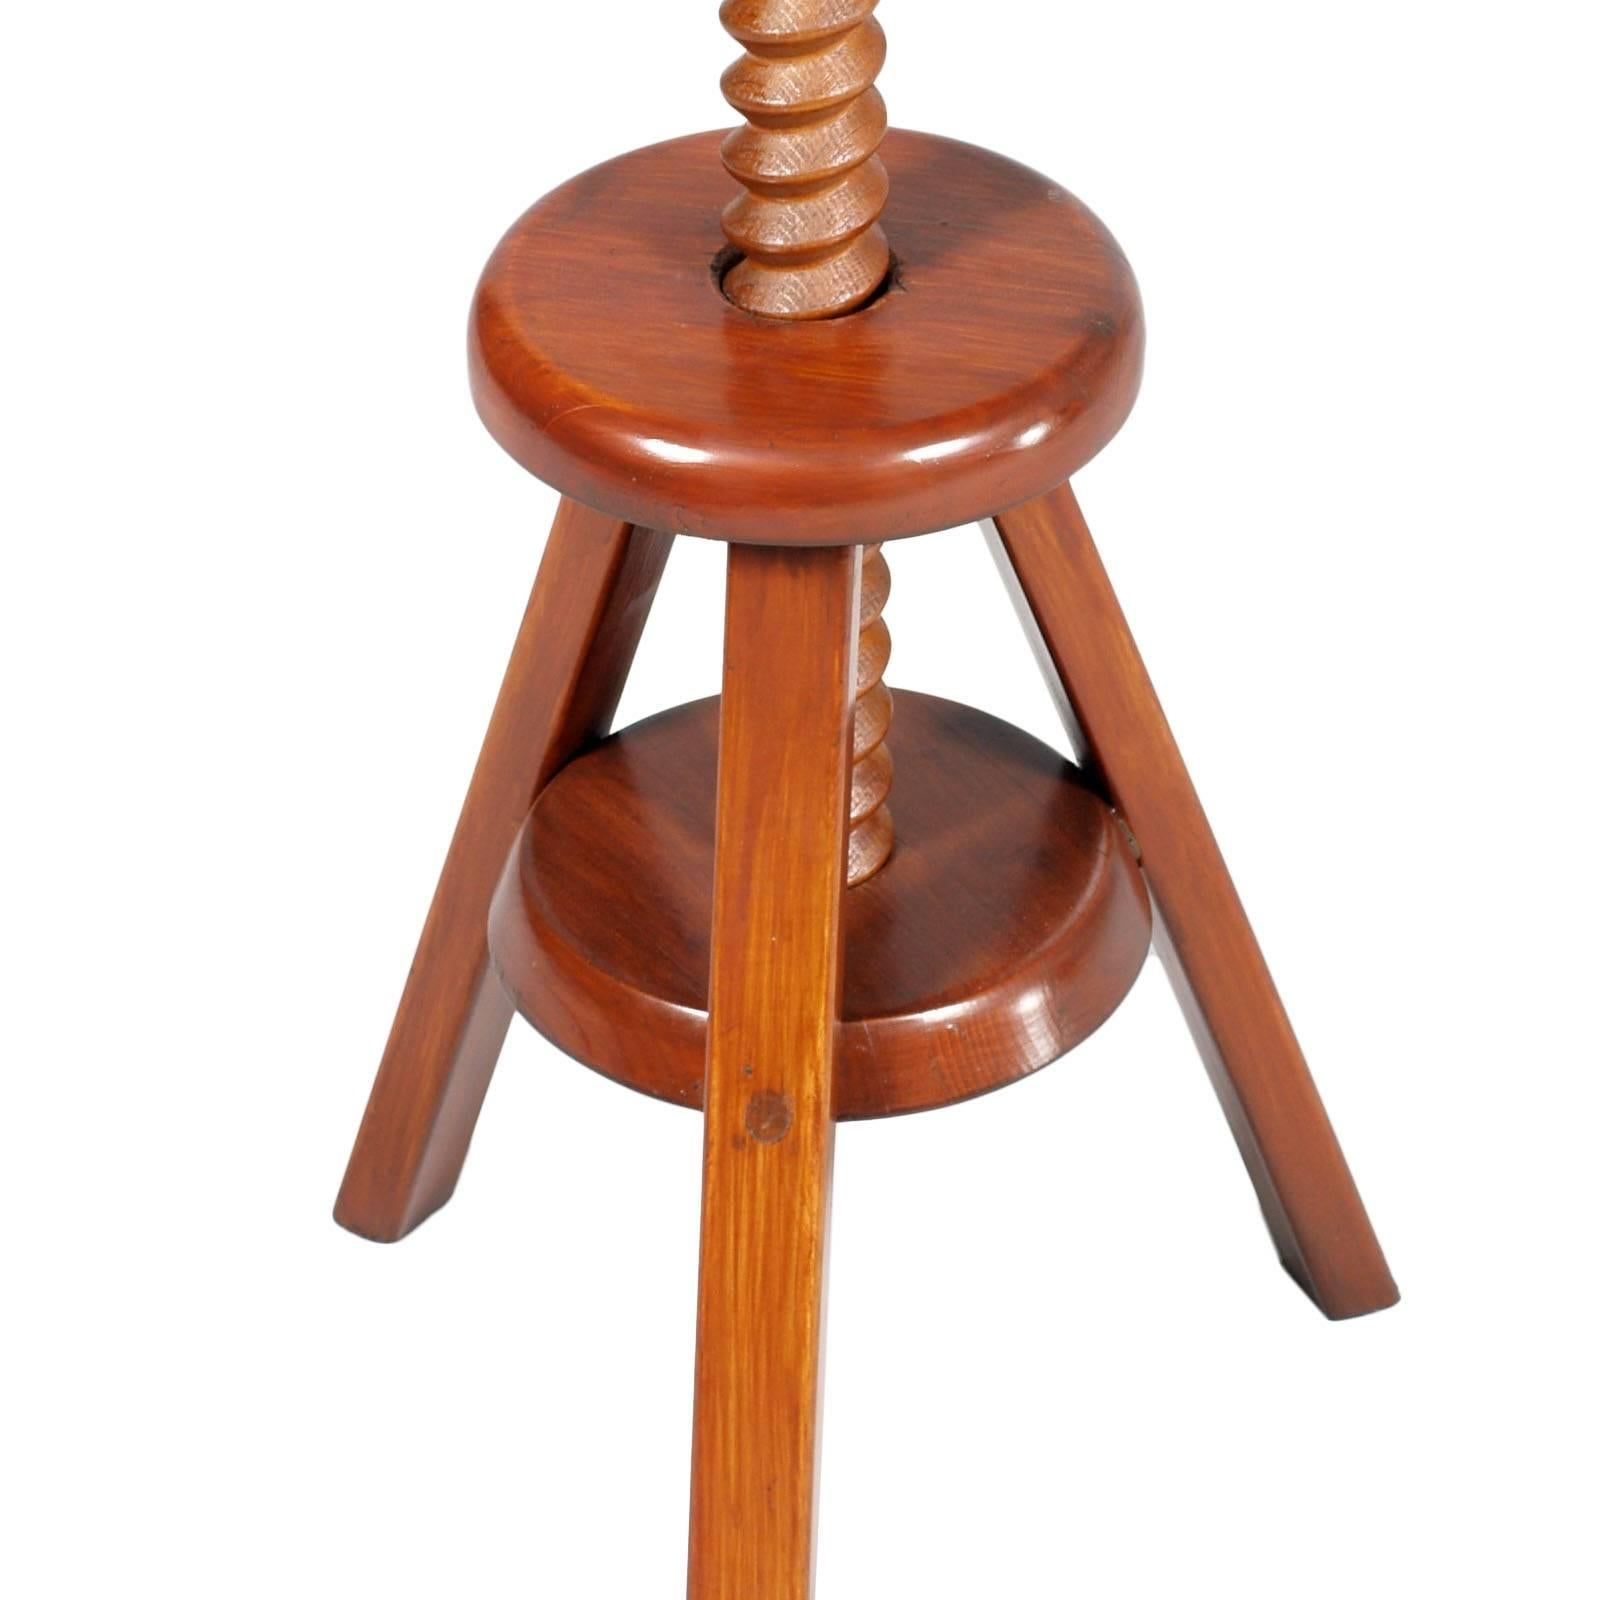 Italian Mid-20th Century Tyrolean Adjustable Tripod Stool, in Red Larch Polished to Wax For Sale